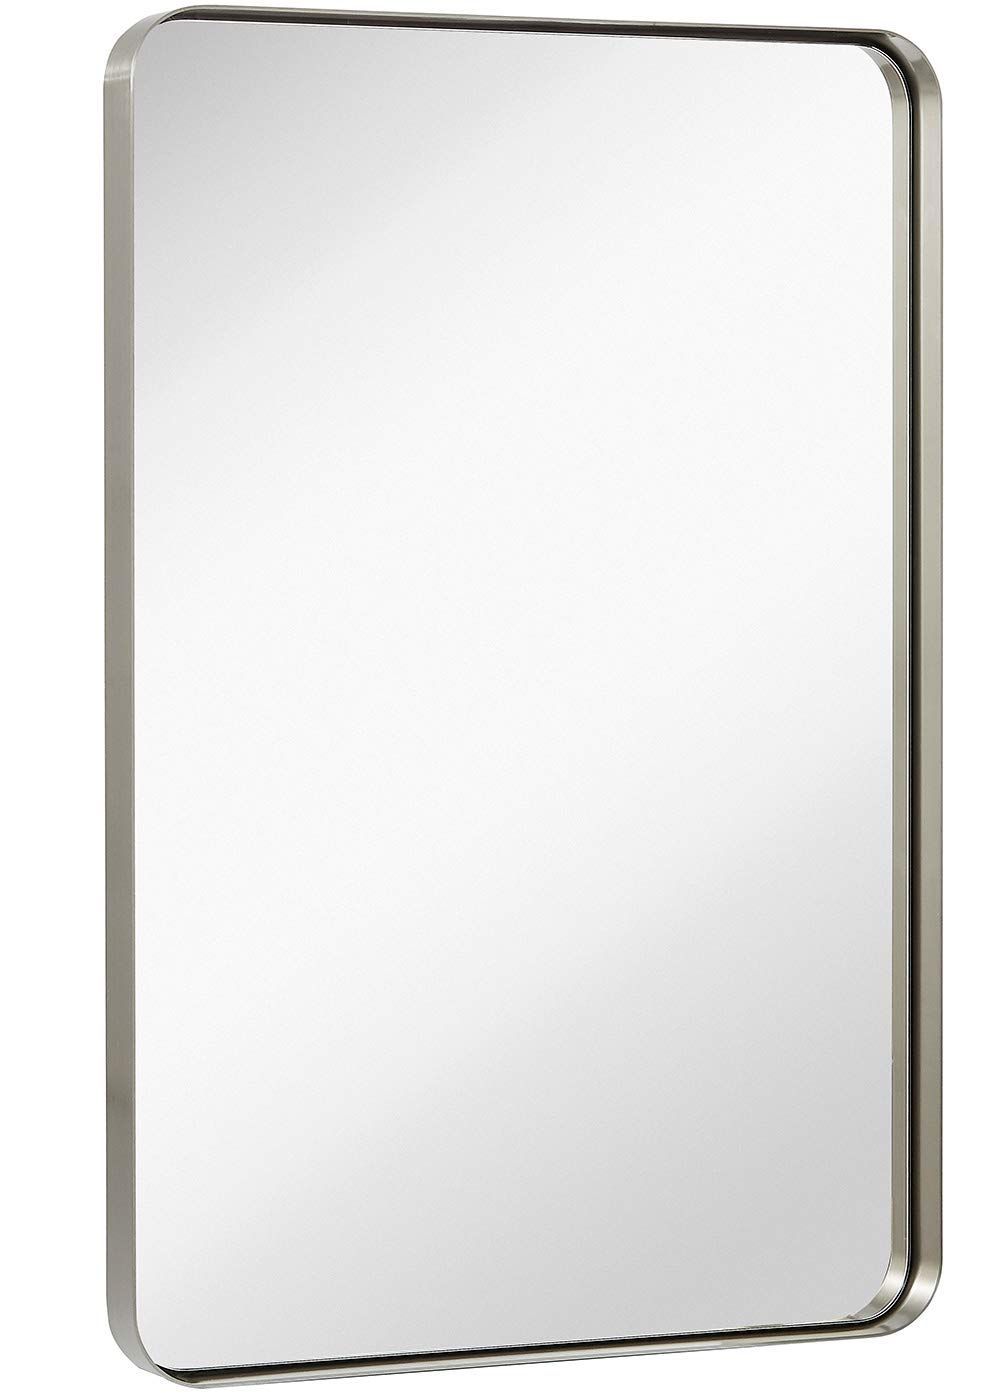 Amazon: Hamilton Hills Contemporary Brushed Metal Wall Mirror Inside Drake Brushed Steel Wall Mirrors (View 1 of 15)